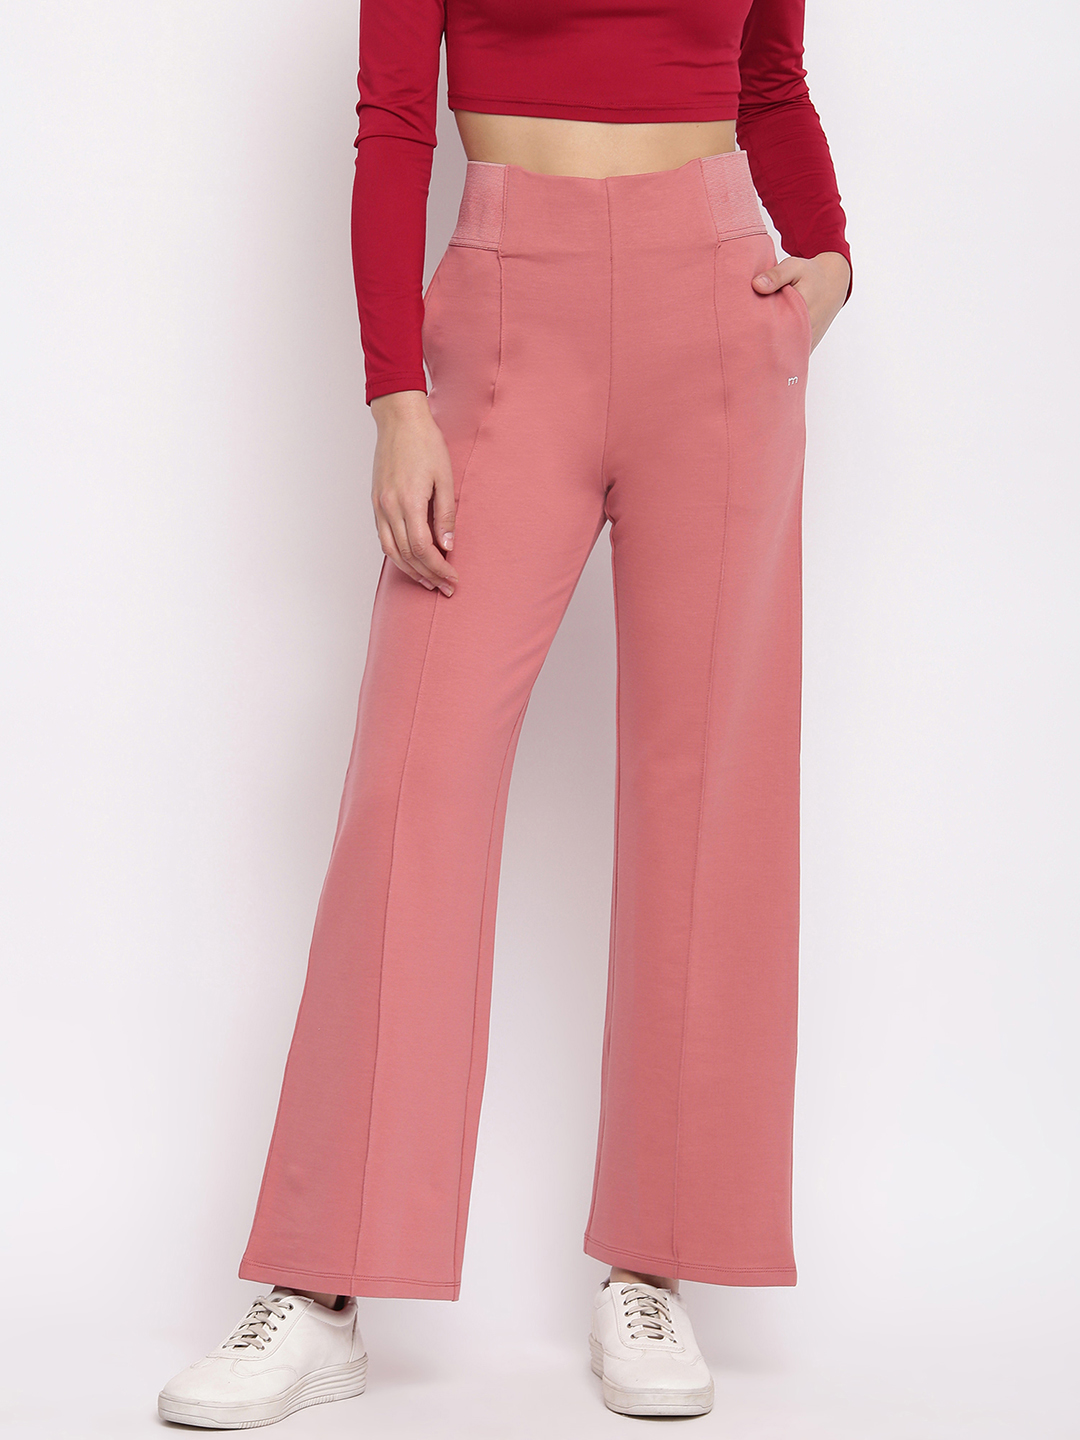 Marvel Women Casual Wear Pink Track Pant